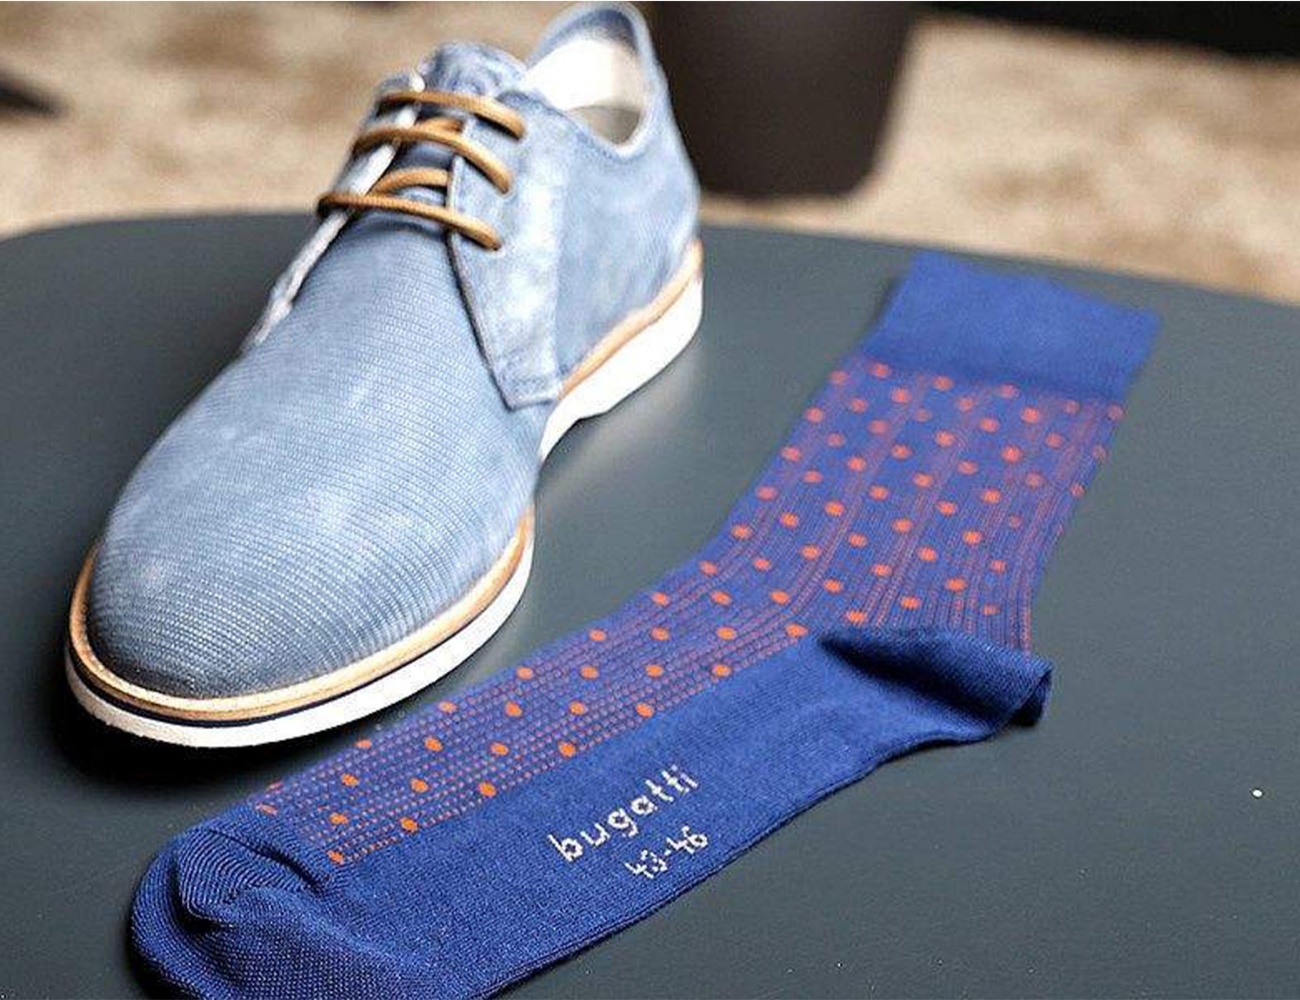 How to style socks – down to the finest detail